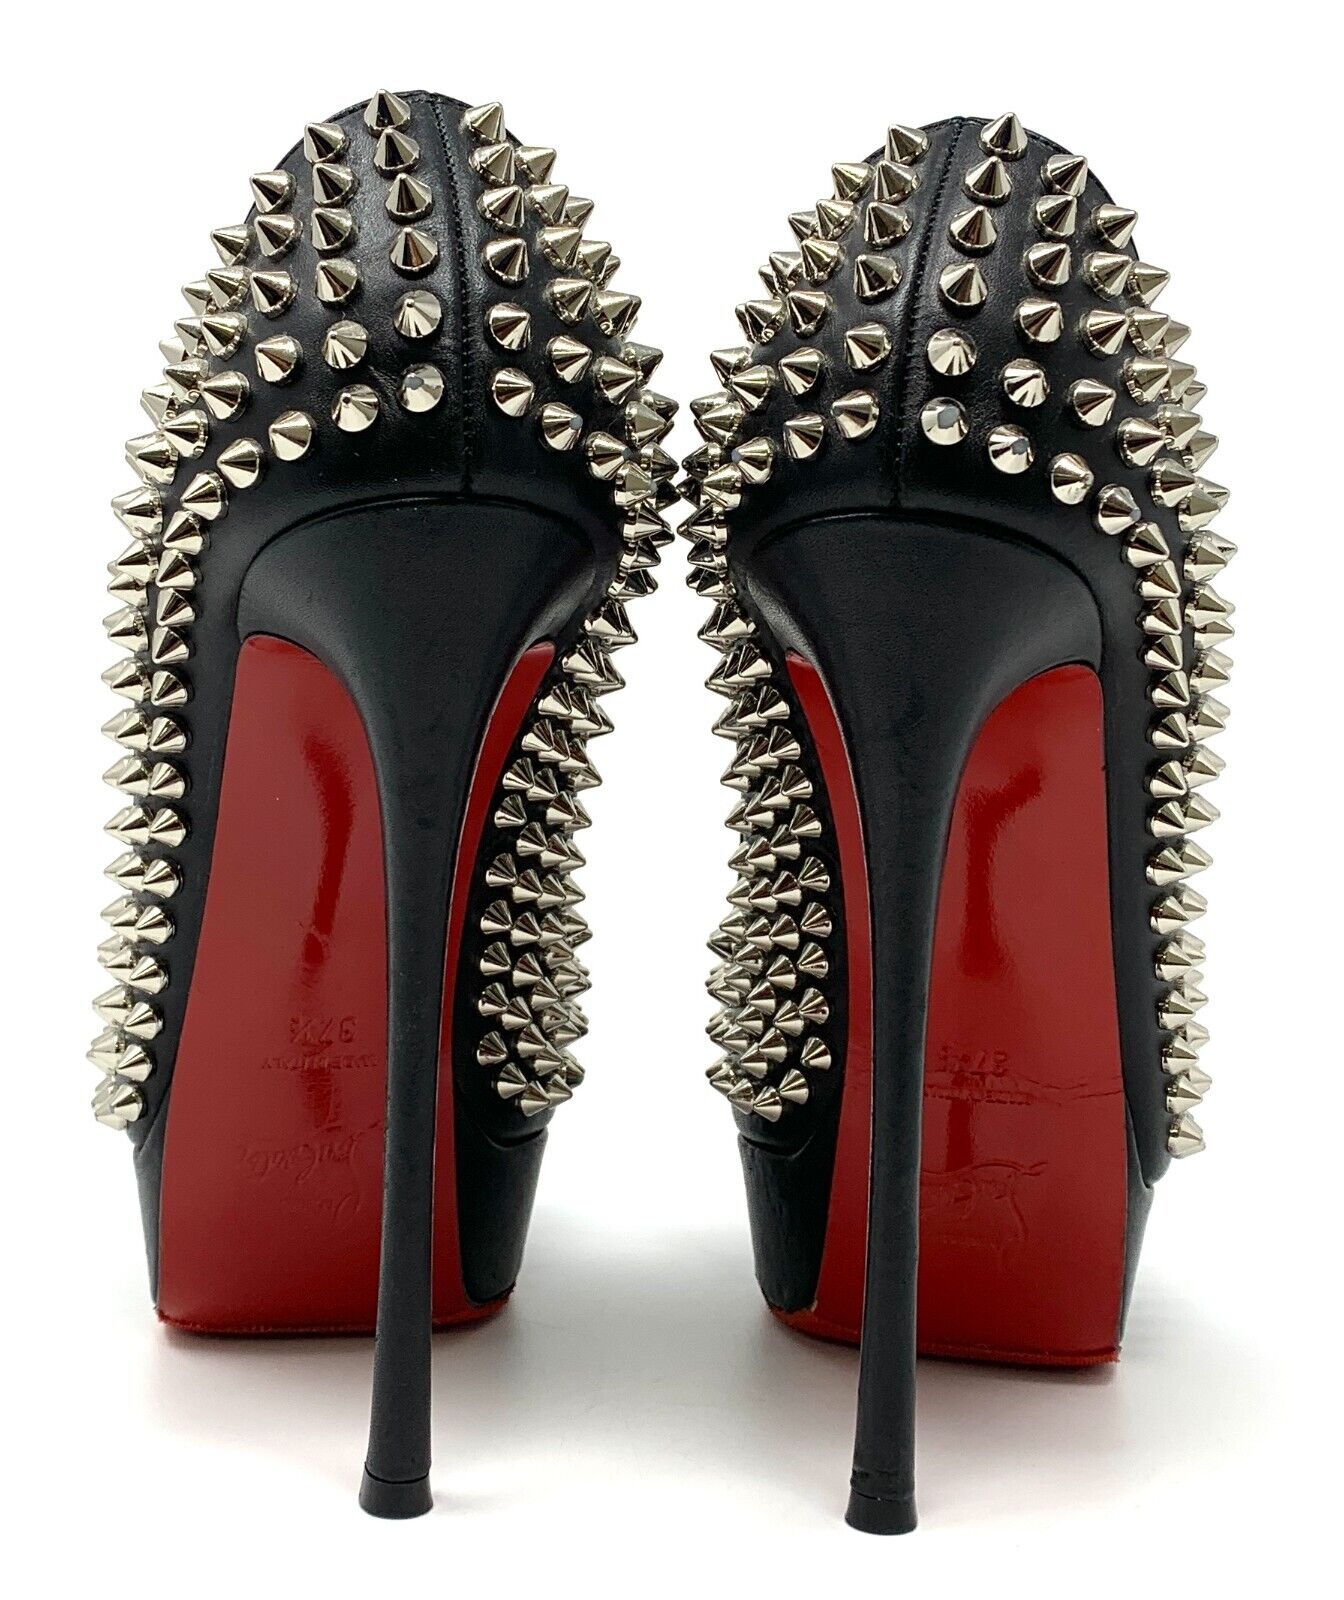 Christian Louboutin Studs Sandals #37.5 US 7.5 Black Silver Leather Rank AB